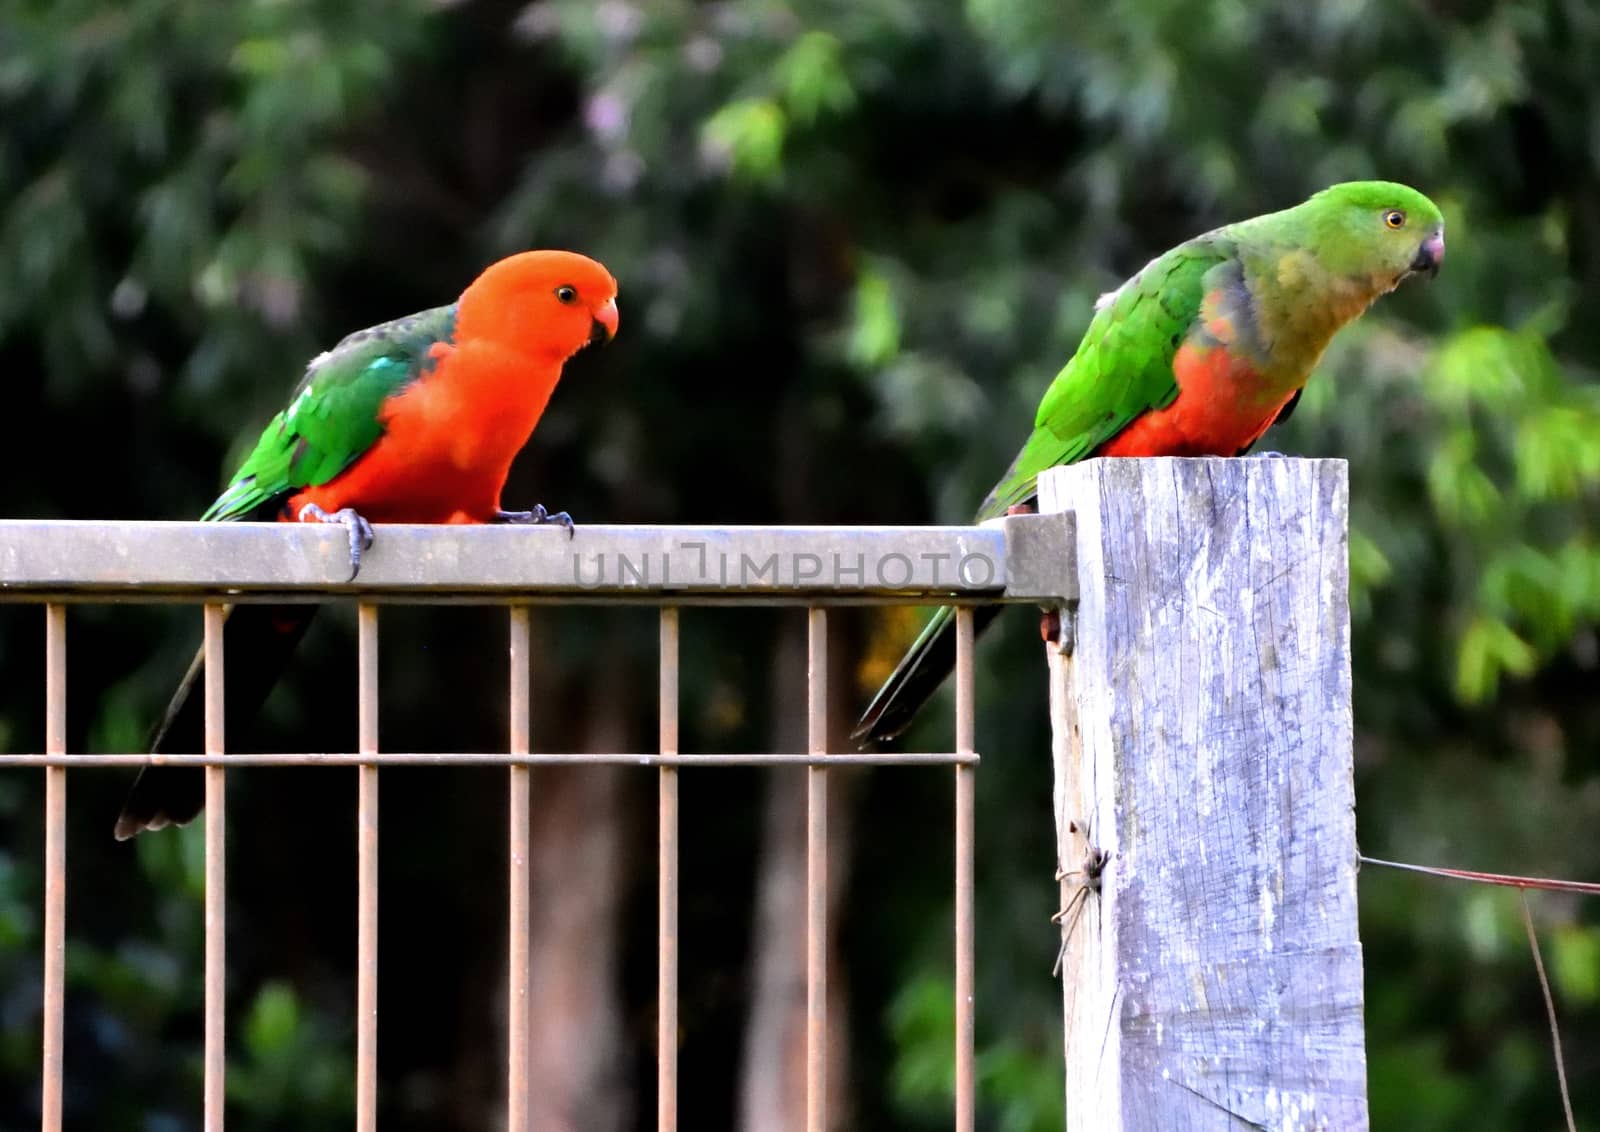 Two king parrots flirting with each other on a fence